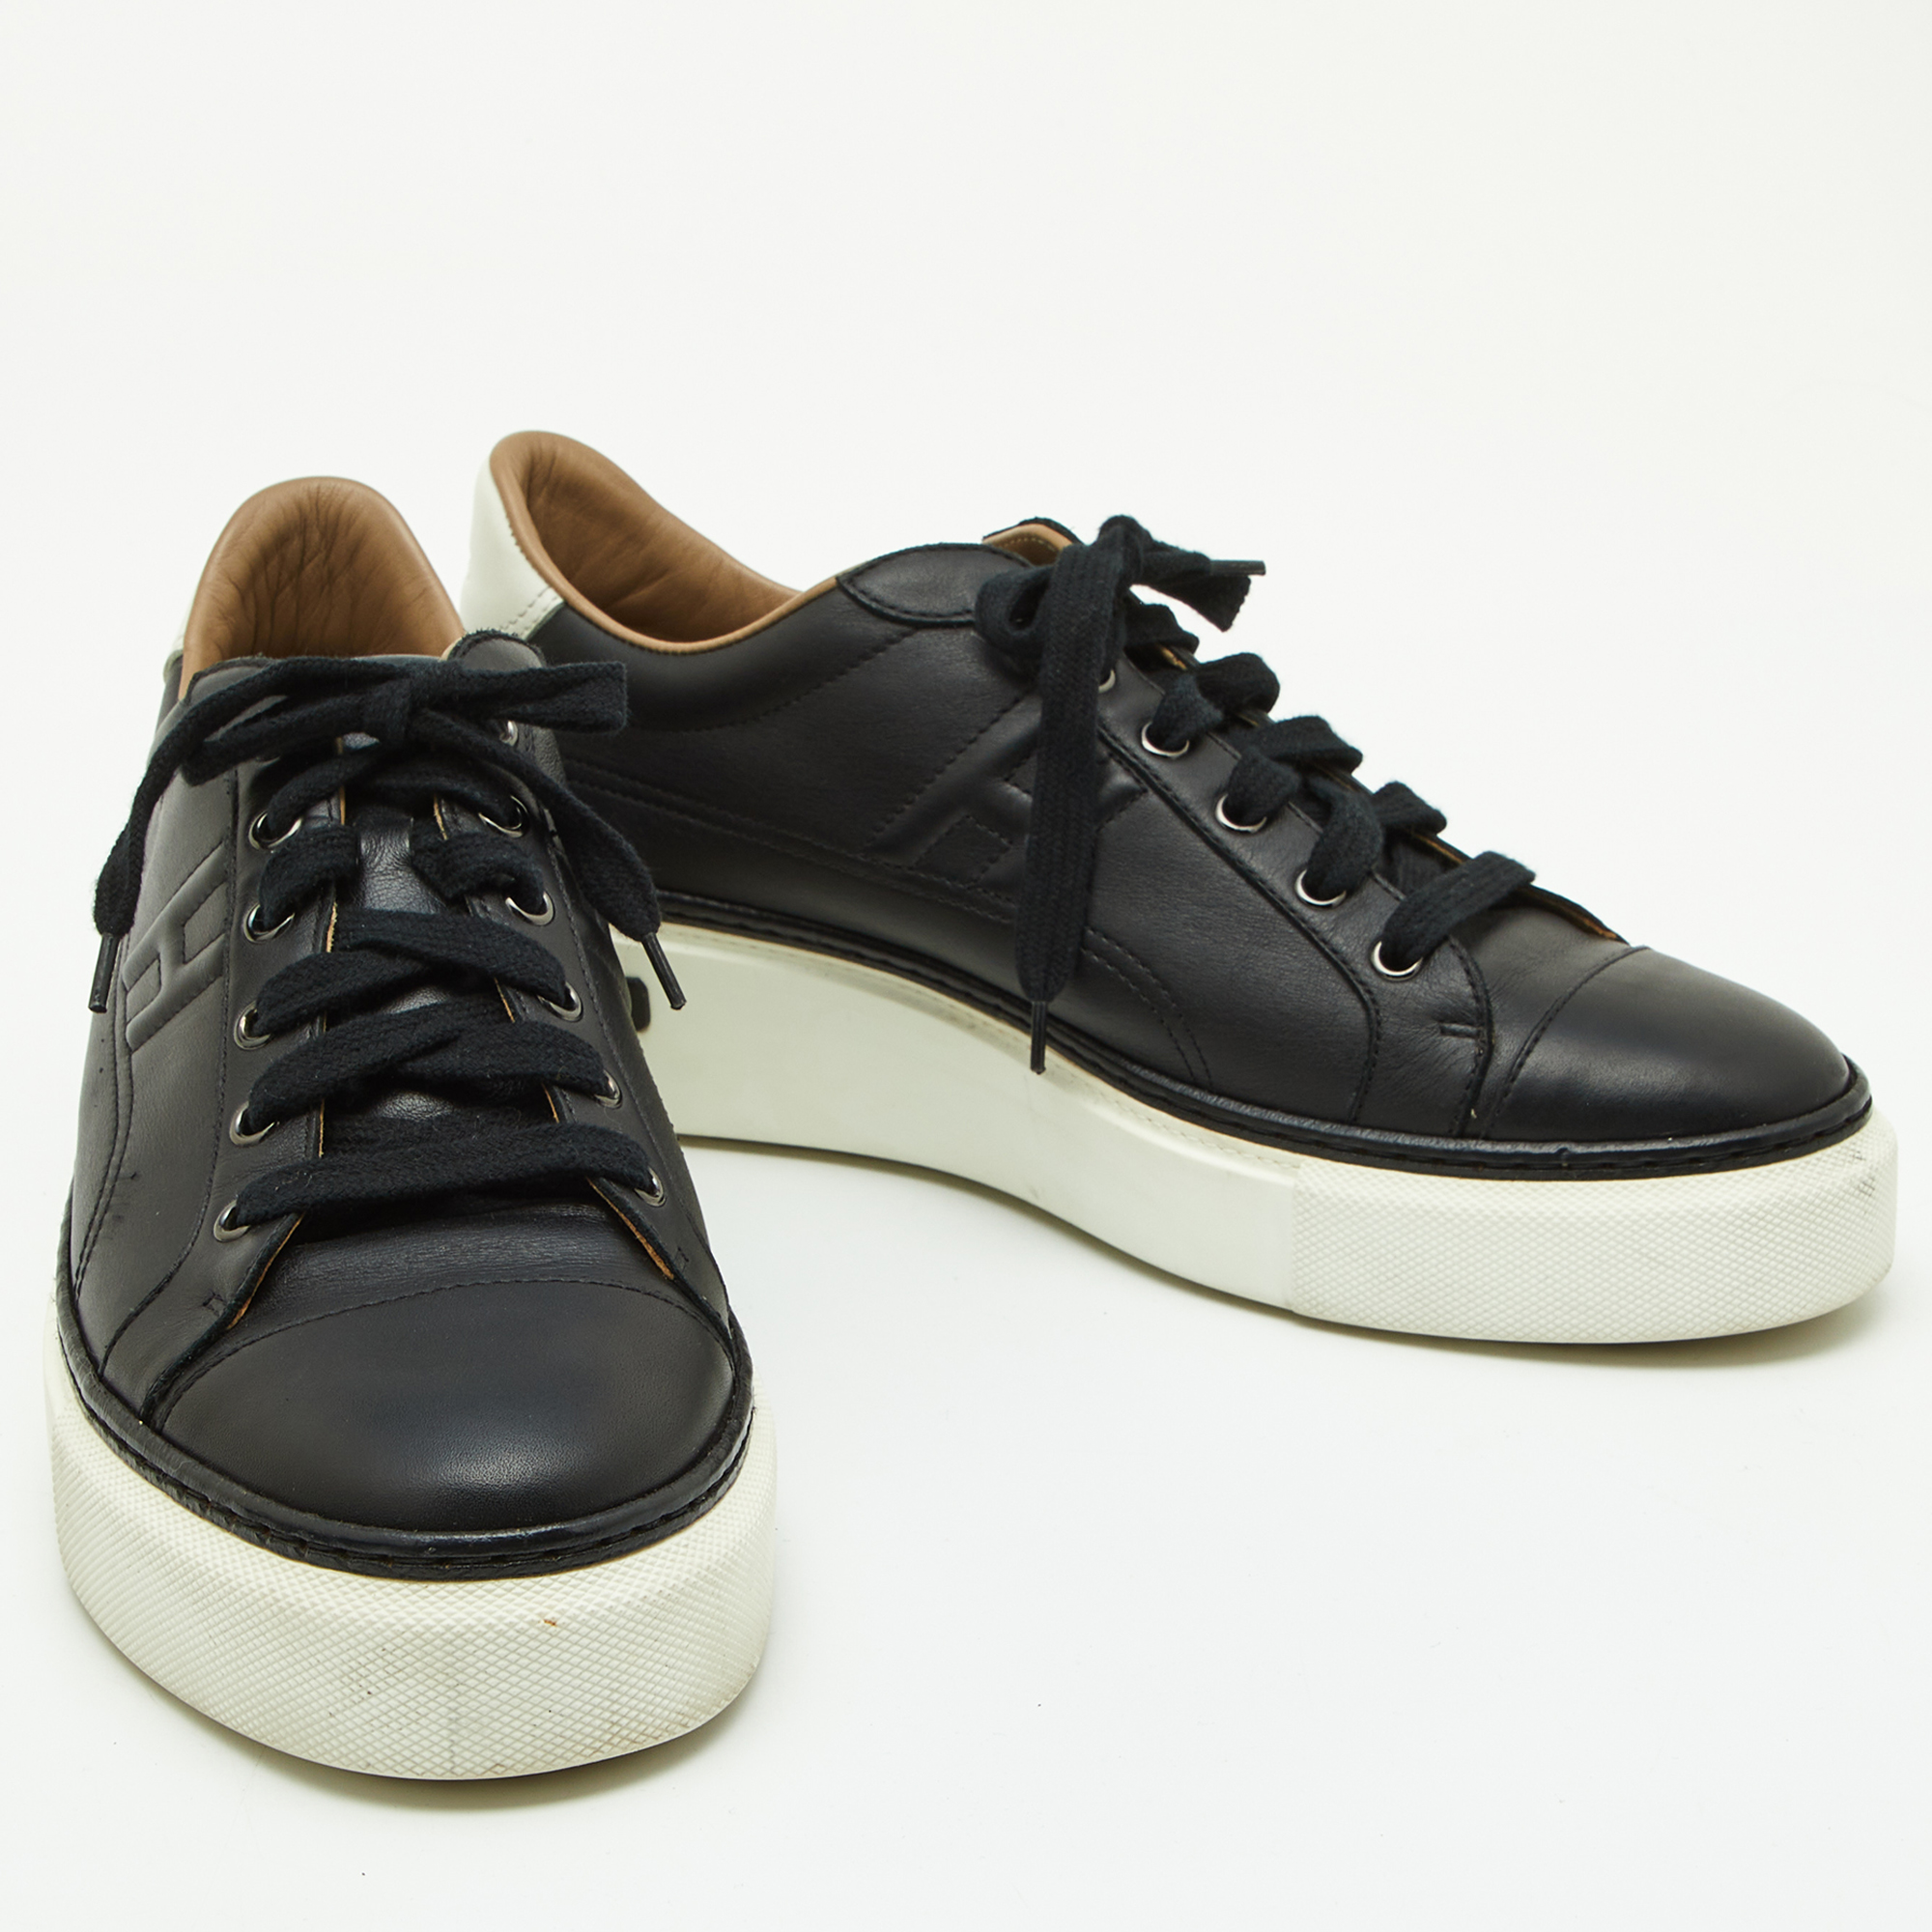 Hermes Black Leather Quicker Sneakers Size 41